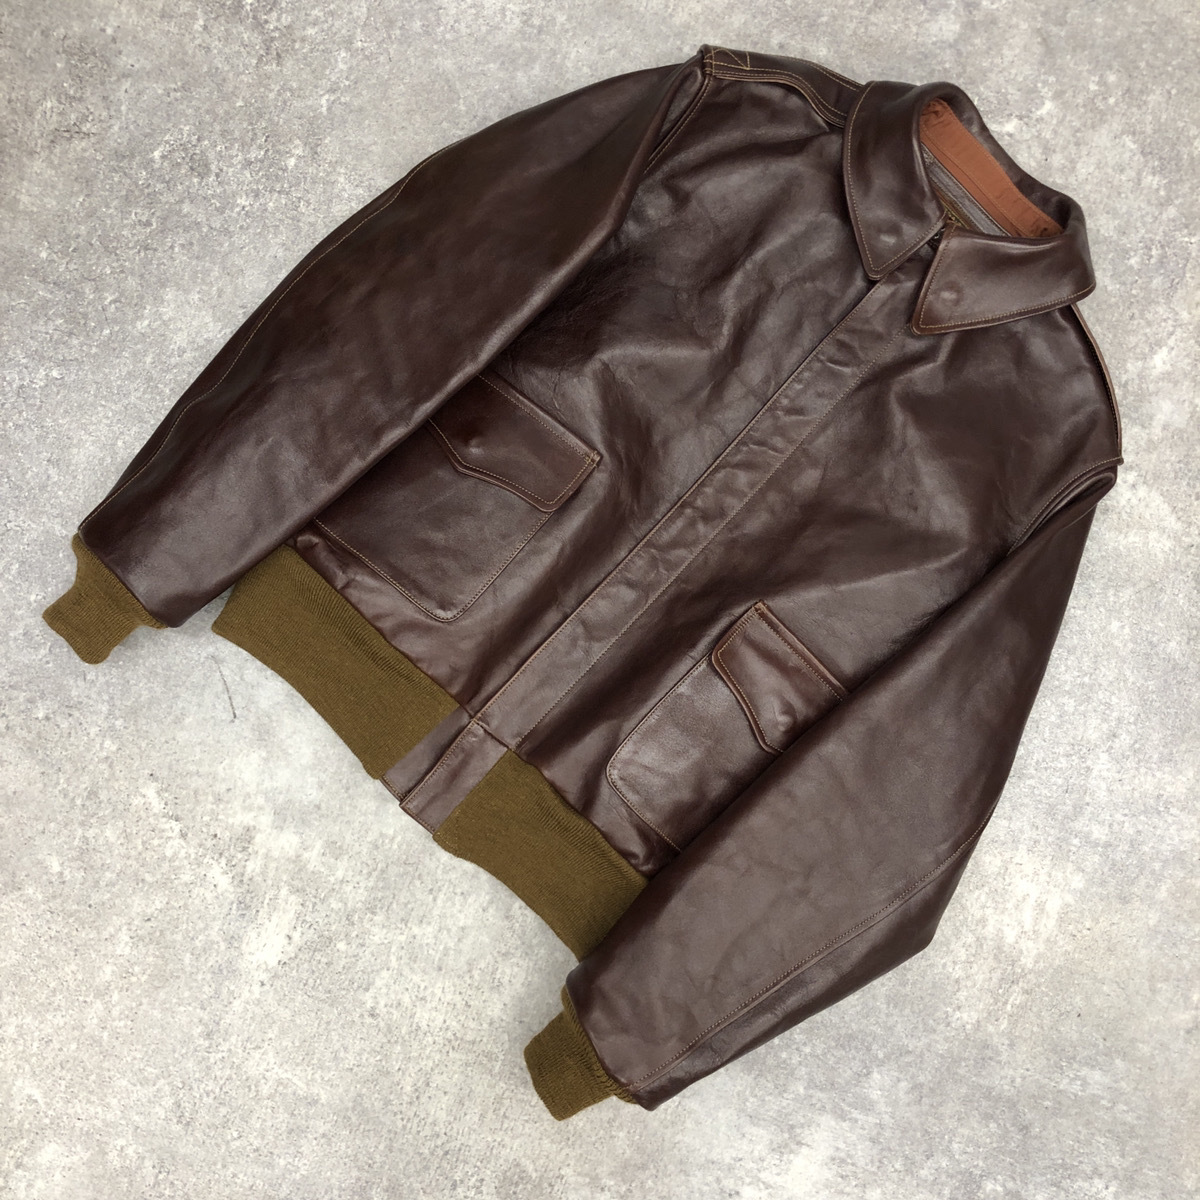 ▲BUZZ RICKSON'S バズリクソンズ Type A-2 POUGHKEEPSIE LEATHER COAT CO,INC ミリタリー フライト ジャケット レザー 馬革 30-1415 104